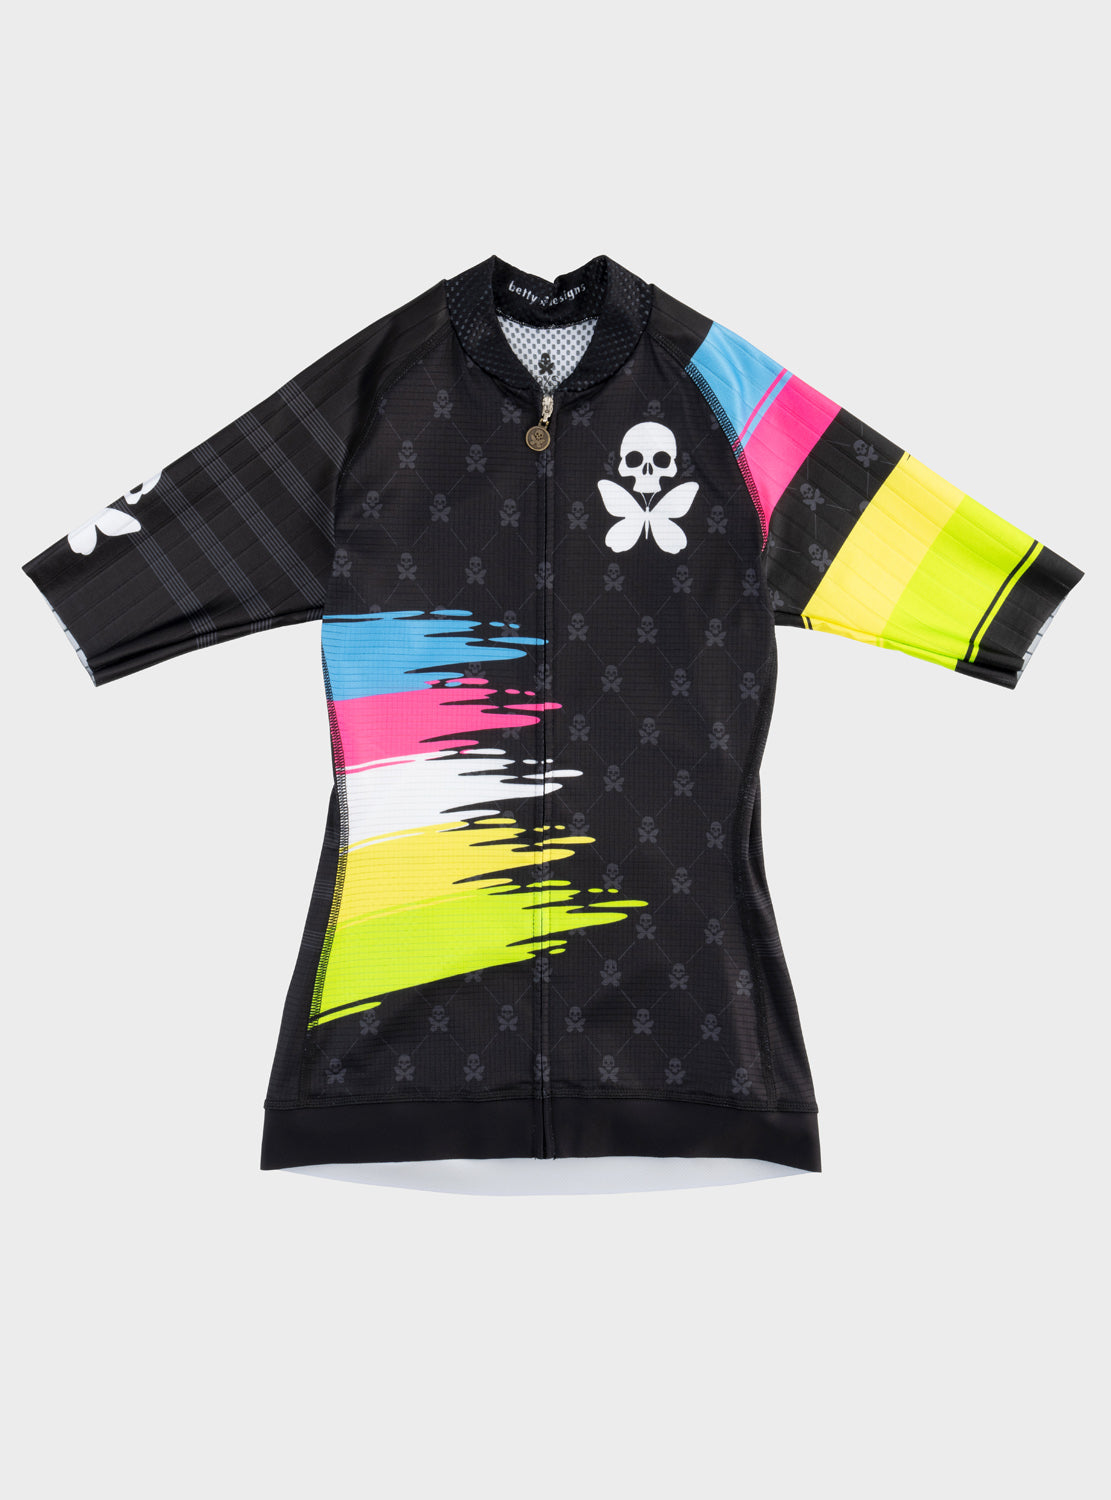 World Champs Race Fit Cycle Jersey